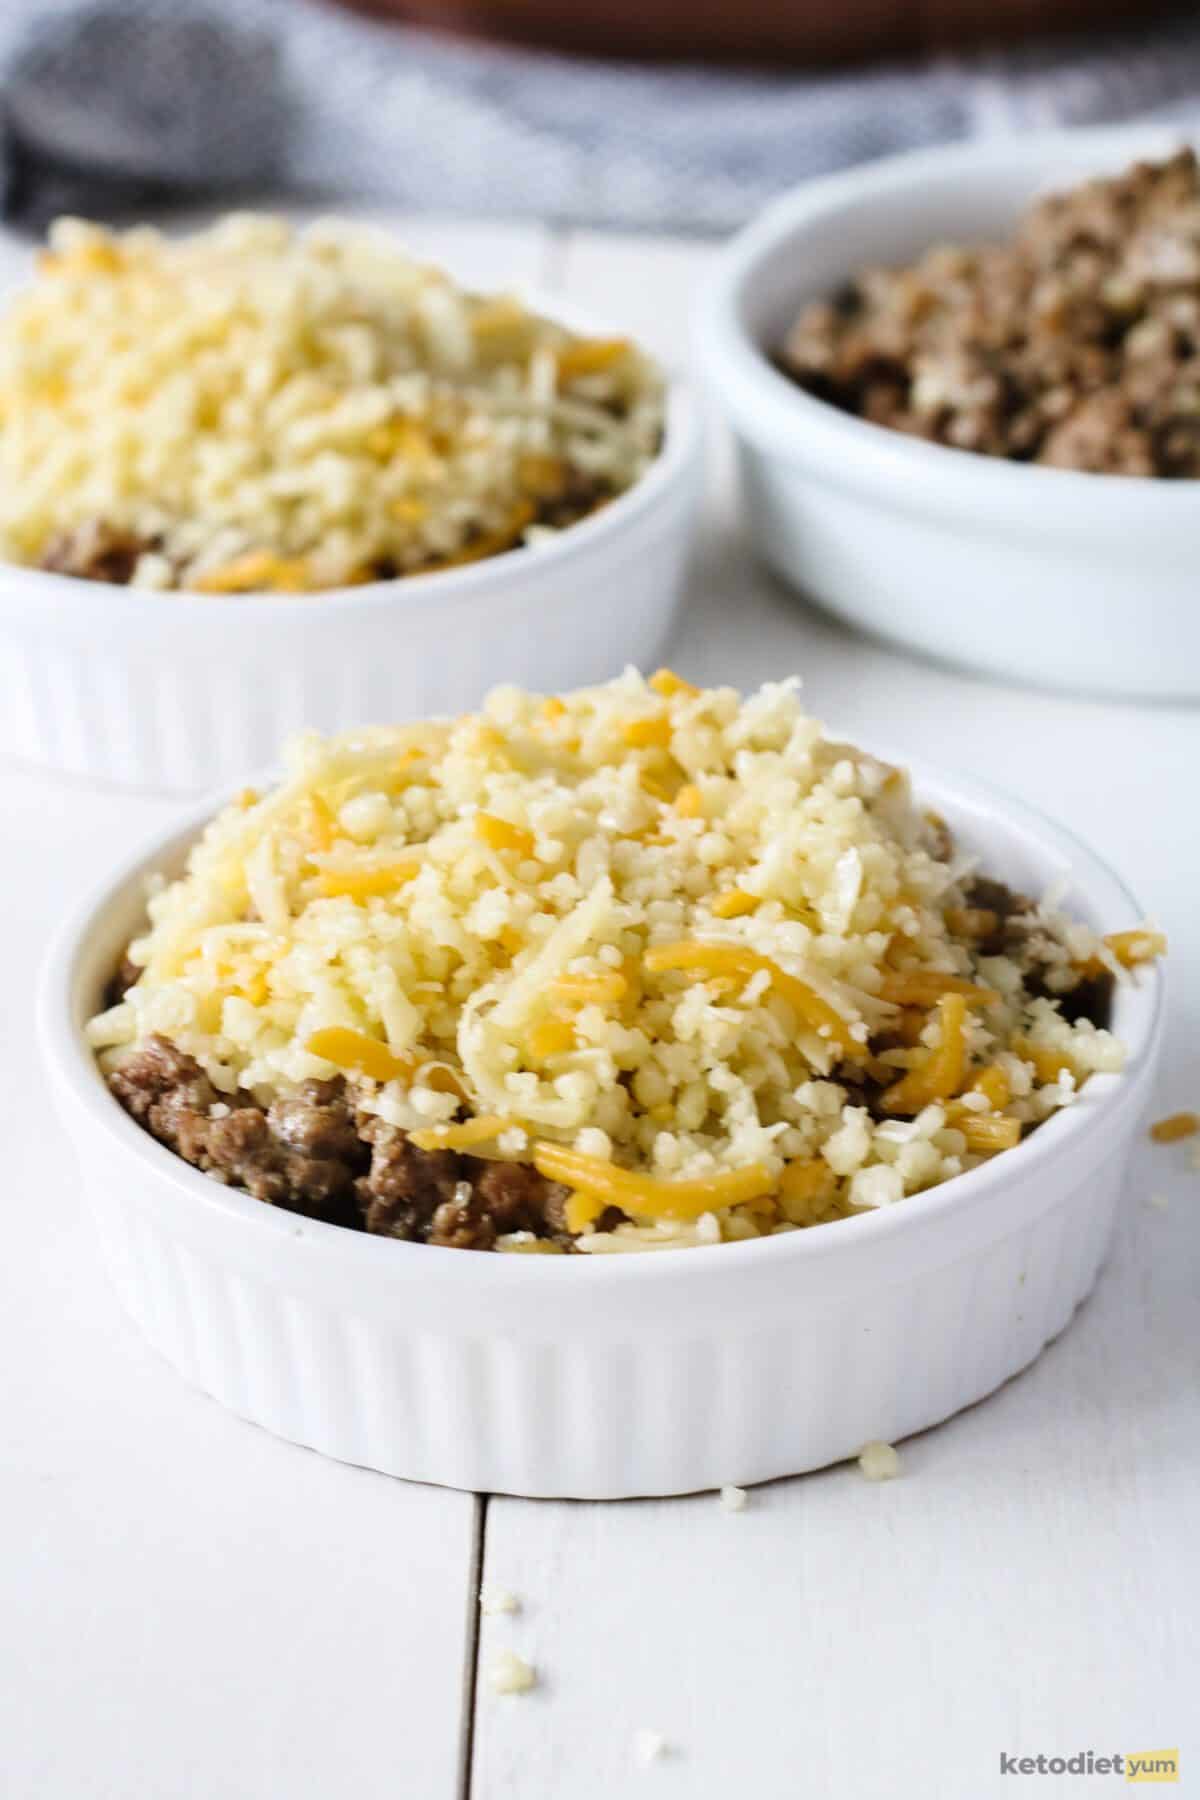 Mini keto cheeseburger pies topped with shredded mixed cheese ready to bake until golden